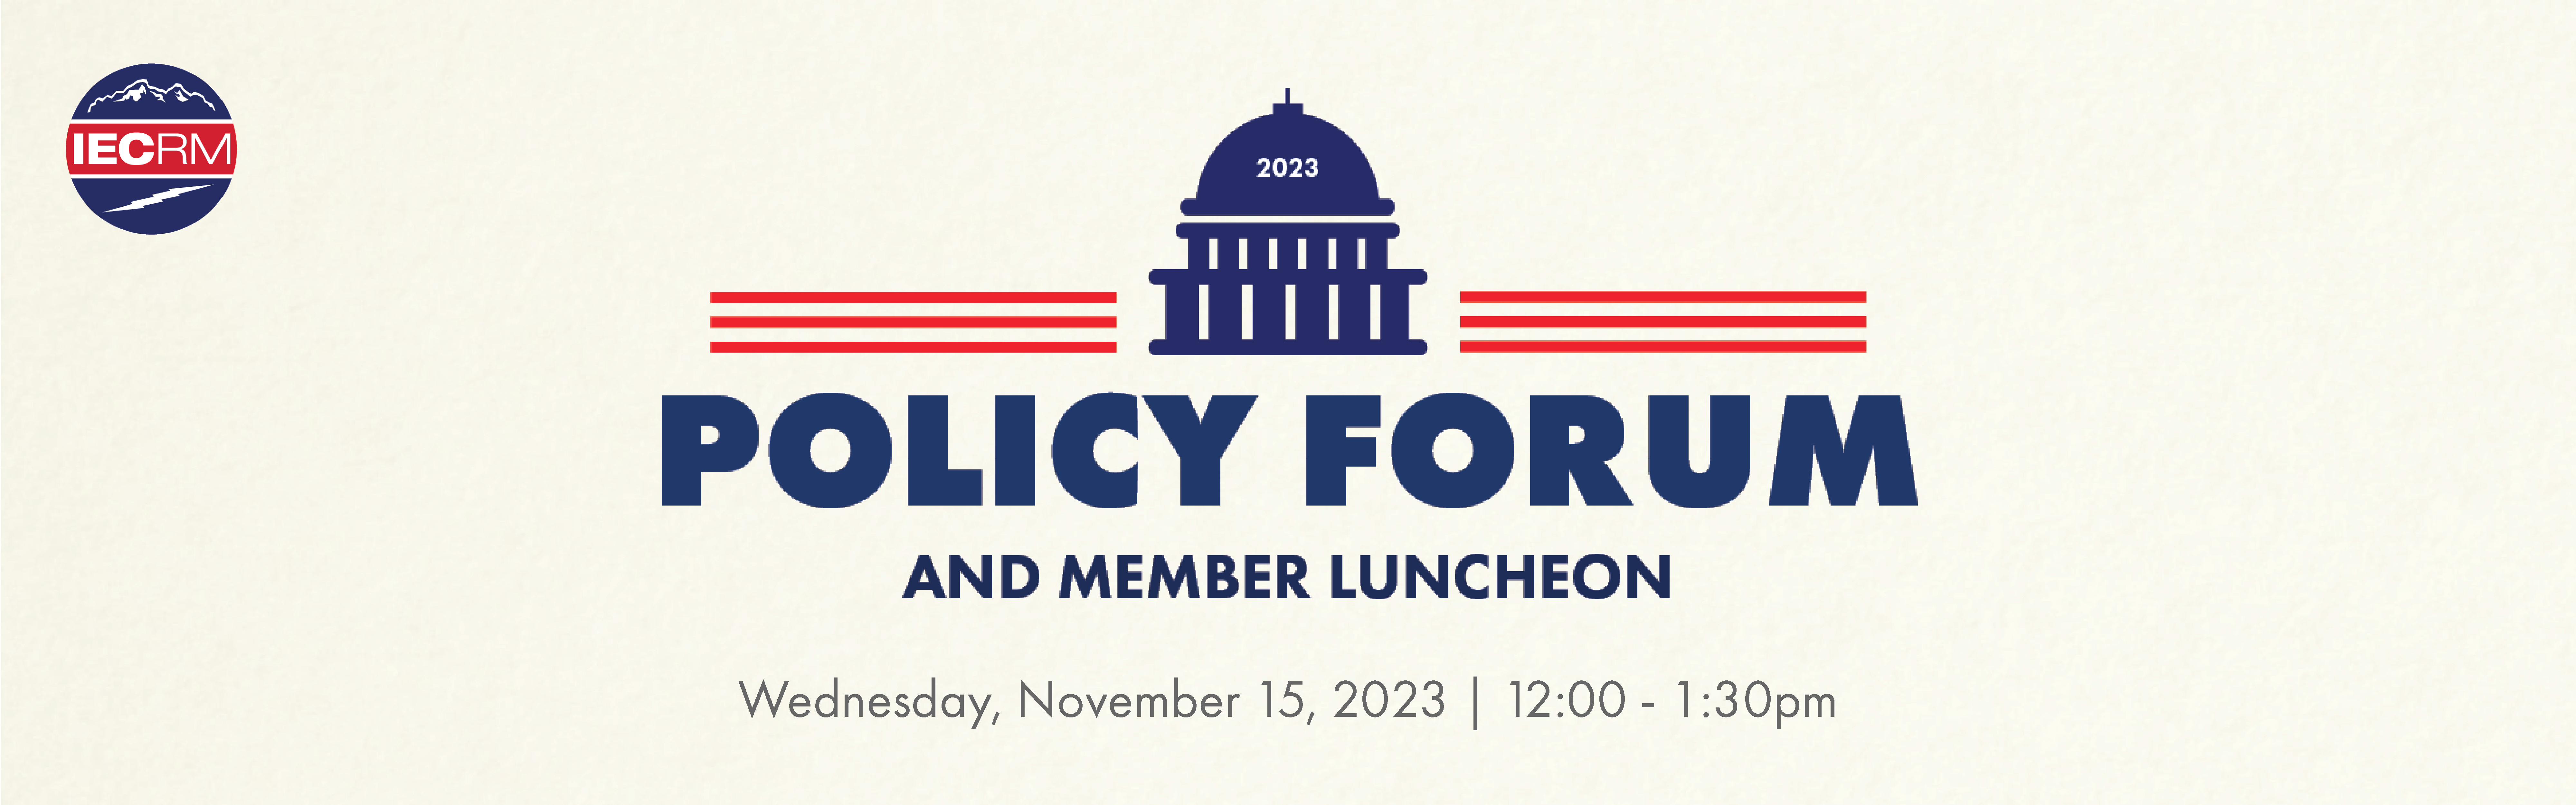 IECRM Annual Policy Forum and Quarterly Member Lunch